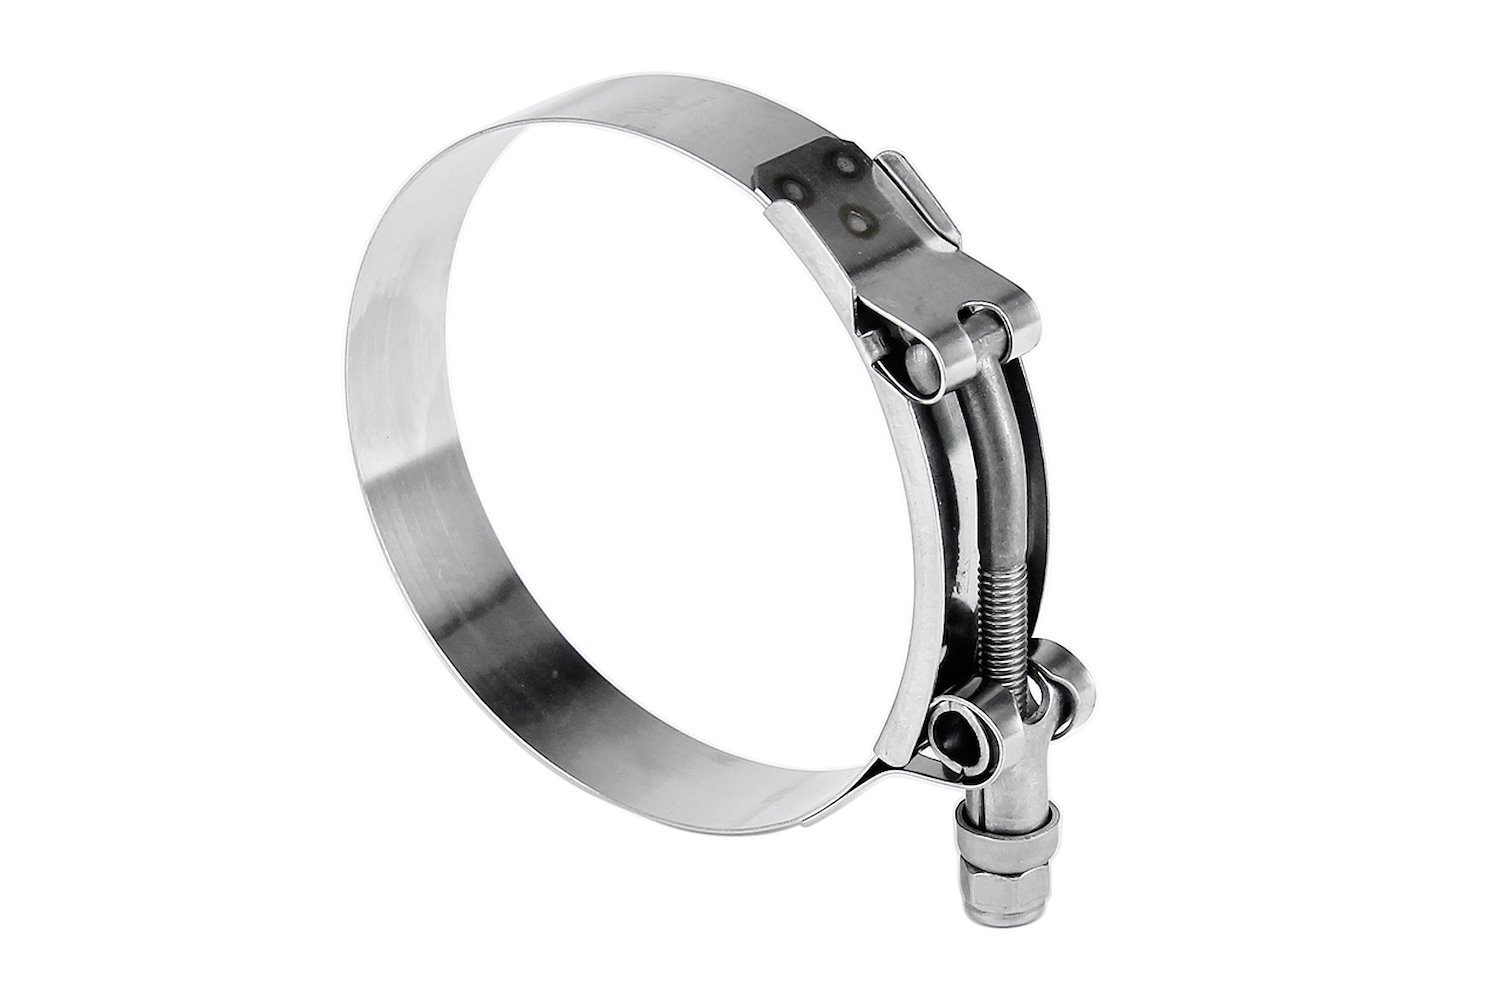 316-SSTC-83-91 100-Percent Marine Grade Stainless Steel T-Bolt Hose Clamp, Size #76, Range: 3.25 in.- 3.58 in.